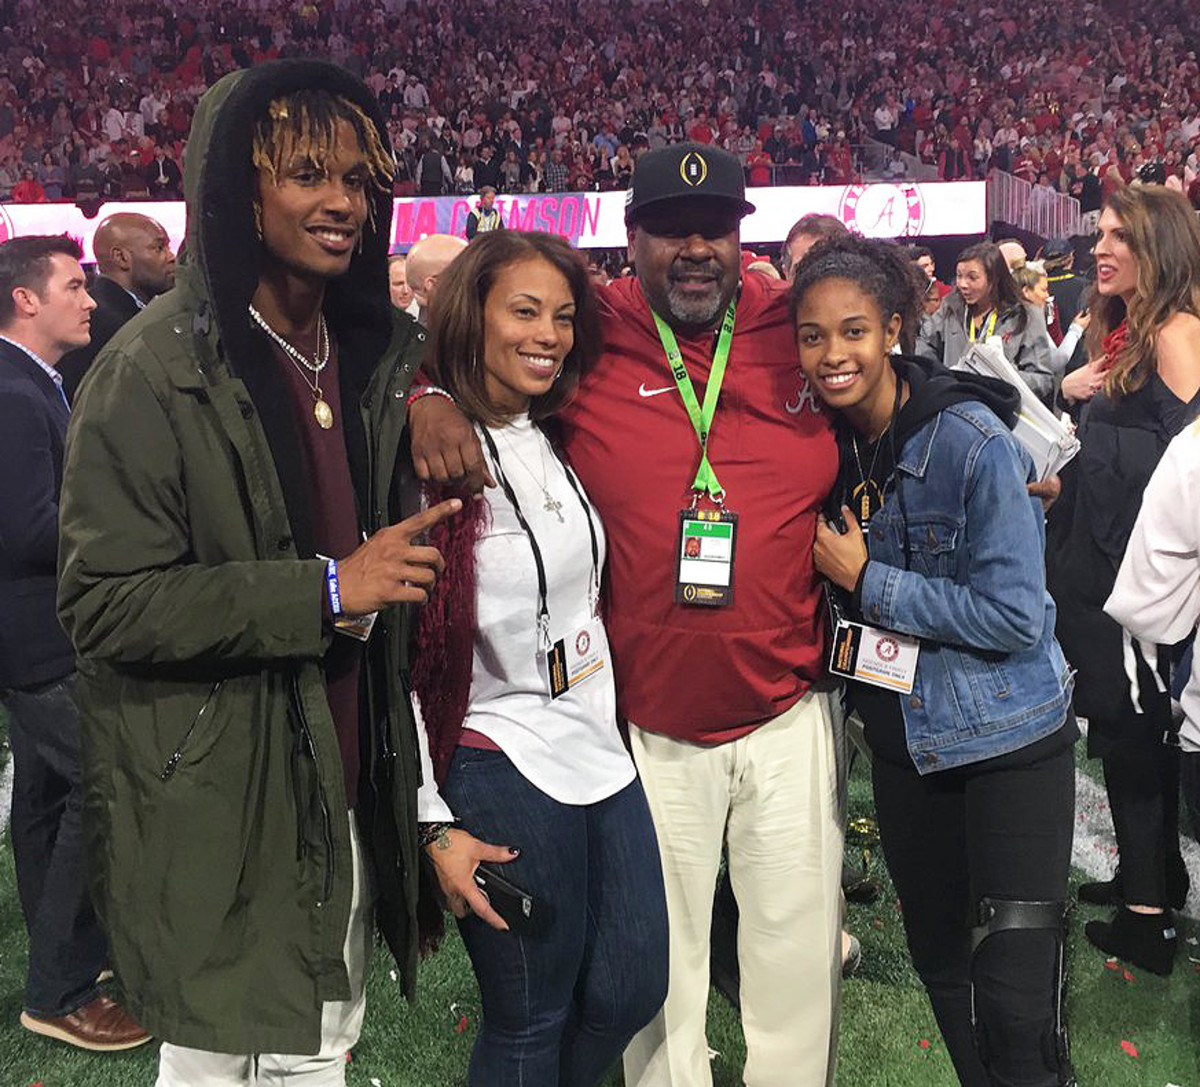 The Locksley family poses for photos after Alabama wins the national championship game over Georgia in 2017. From left to right: Kai Locksley, Kia Locksley, Mike Locksley and Kory Locksley.